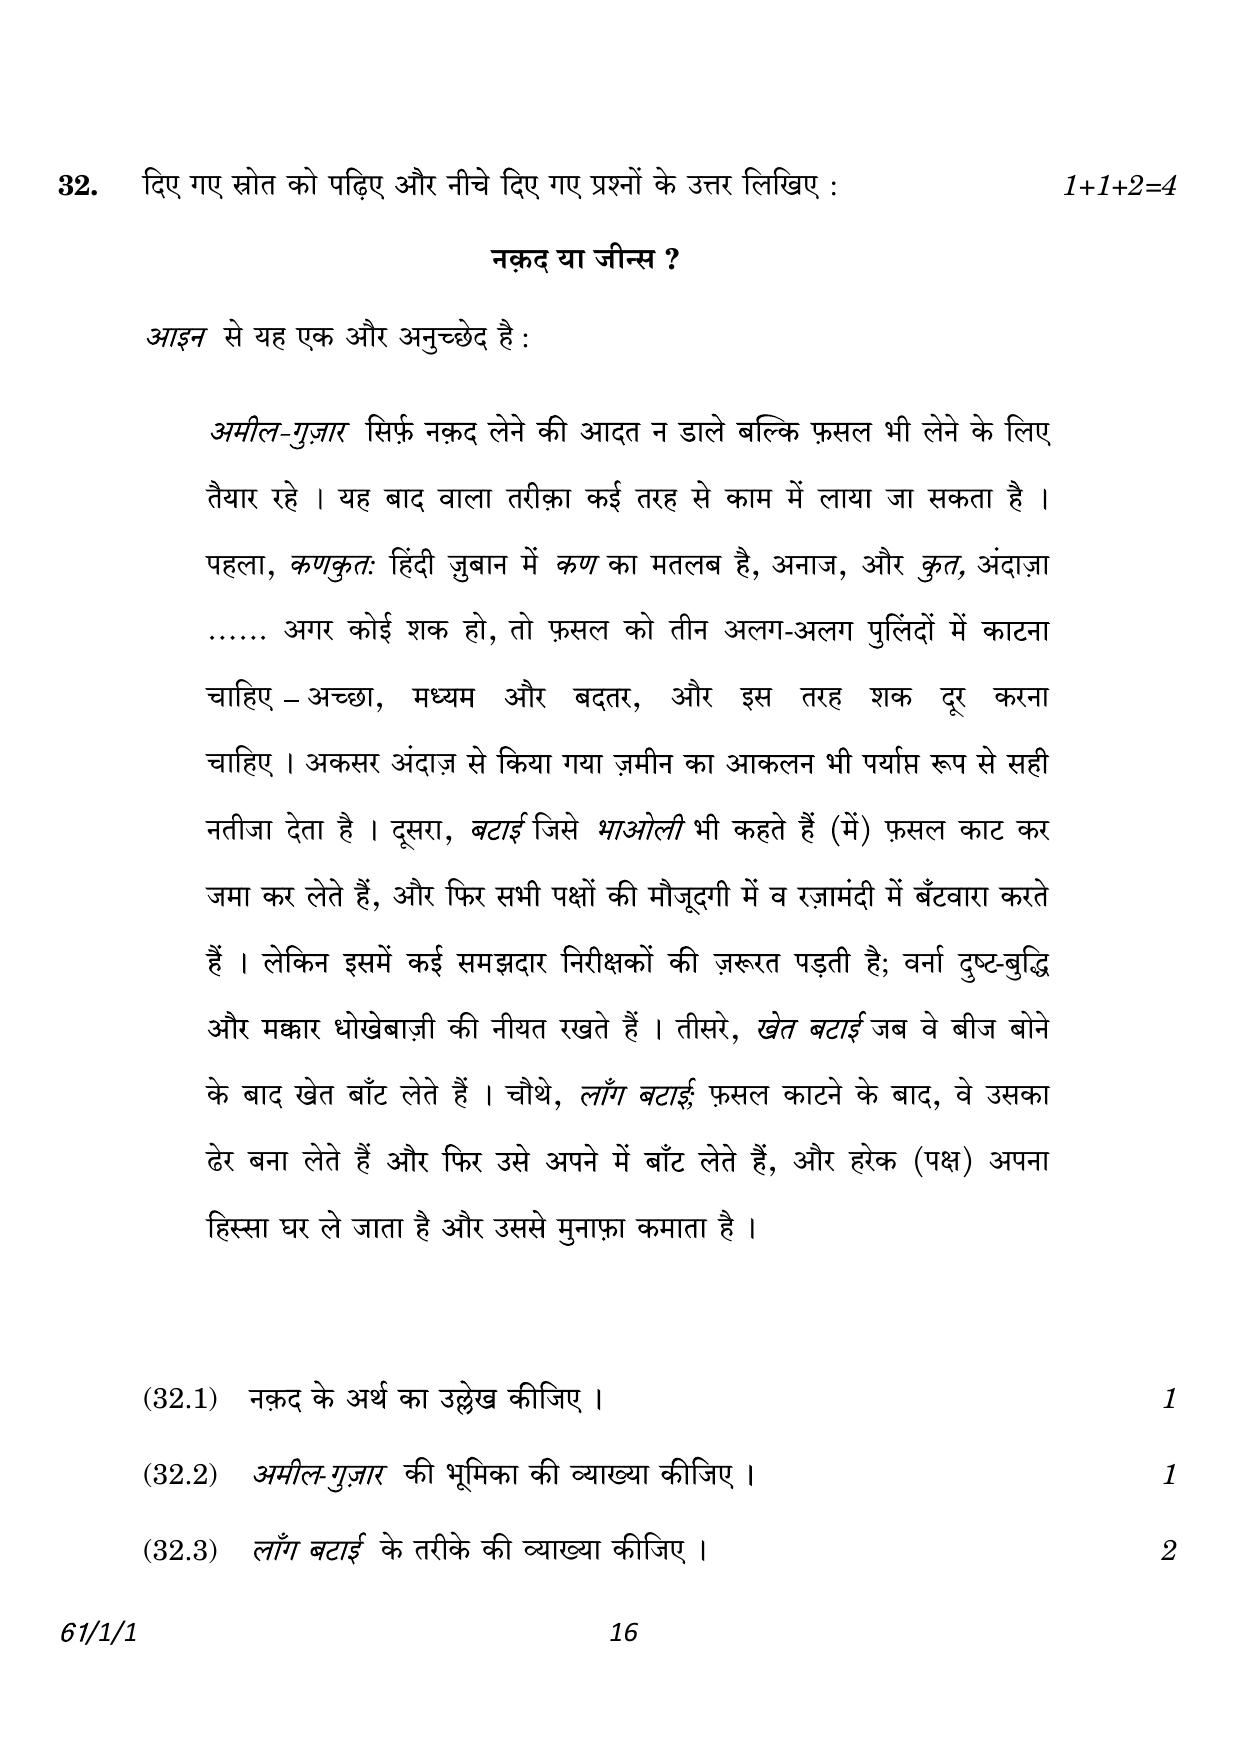 CBSE Class 12 61-1-1 History 2023 Question Paper - Page 16